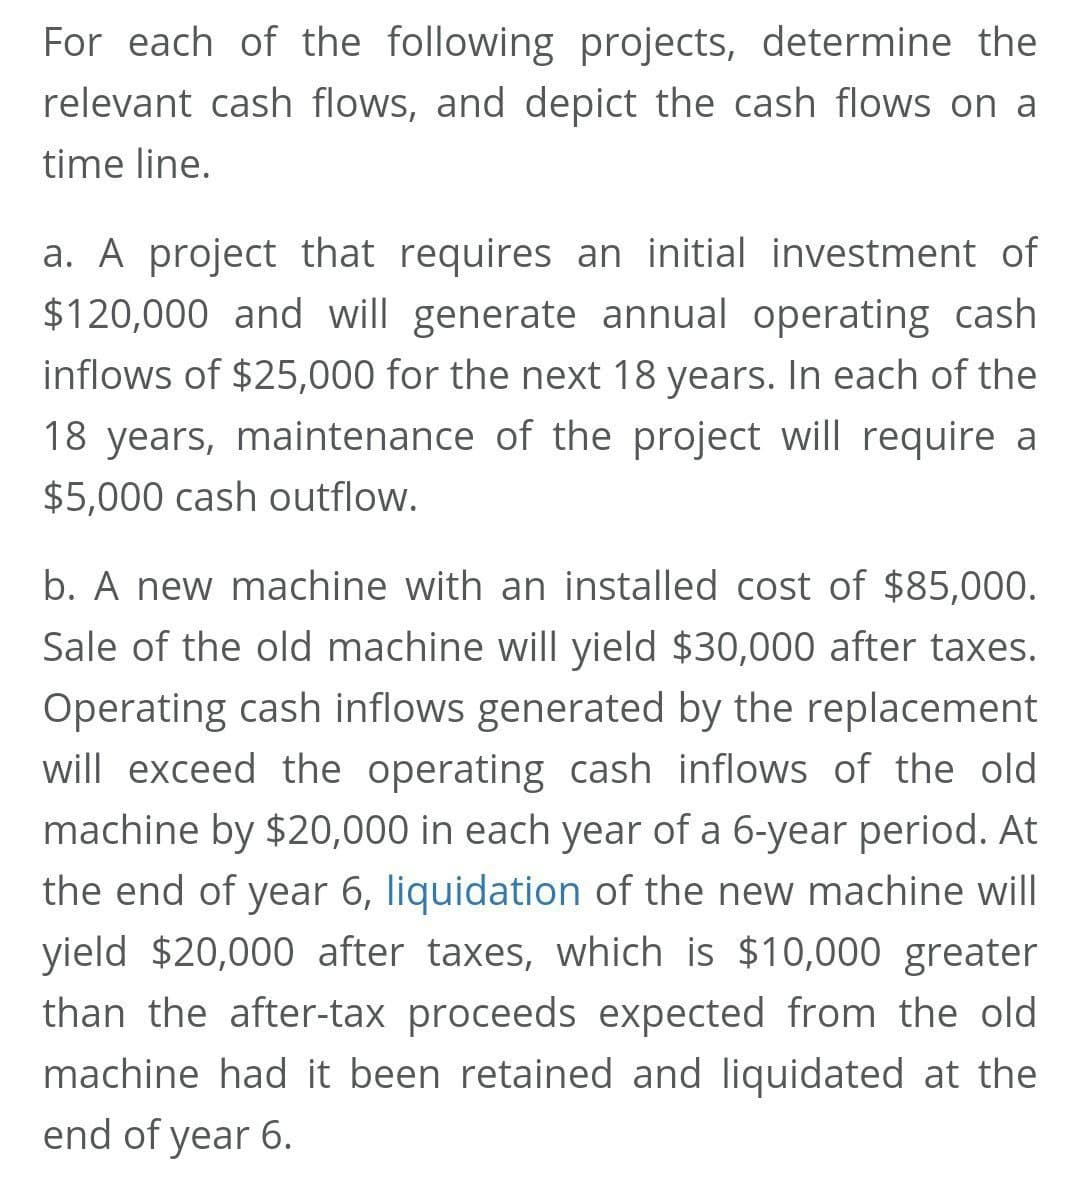 For each of the following projects, determine the
relevant cash flows, and depict the cash flows on a
time line.
a. A project that requires an initial investment of
$120,000 and will generate annual operating cash
inflows of $25,000 for the next 18 years. In each of the
18 years, maintenance of the project will require a
$5,000 cash outflow.
b. A new machine with an installed cost of $85,000.
Sale of the old machine will yield $30,000 after taxes.
Operating cash inflows generated by the replacement
will exceed the operating cash inflows of the old
machine by $20,000 in each year of a 6-year period. At
the end of year 6, liquidation of the new machine will
yield $20,000 after taxes, which is $10,000 greater
than the after-tax proceeds expected from the old
machine had it been retained and liquidated at the
end of year 6.
